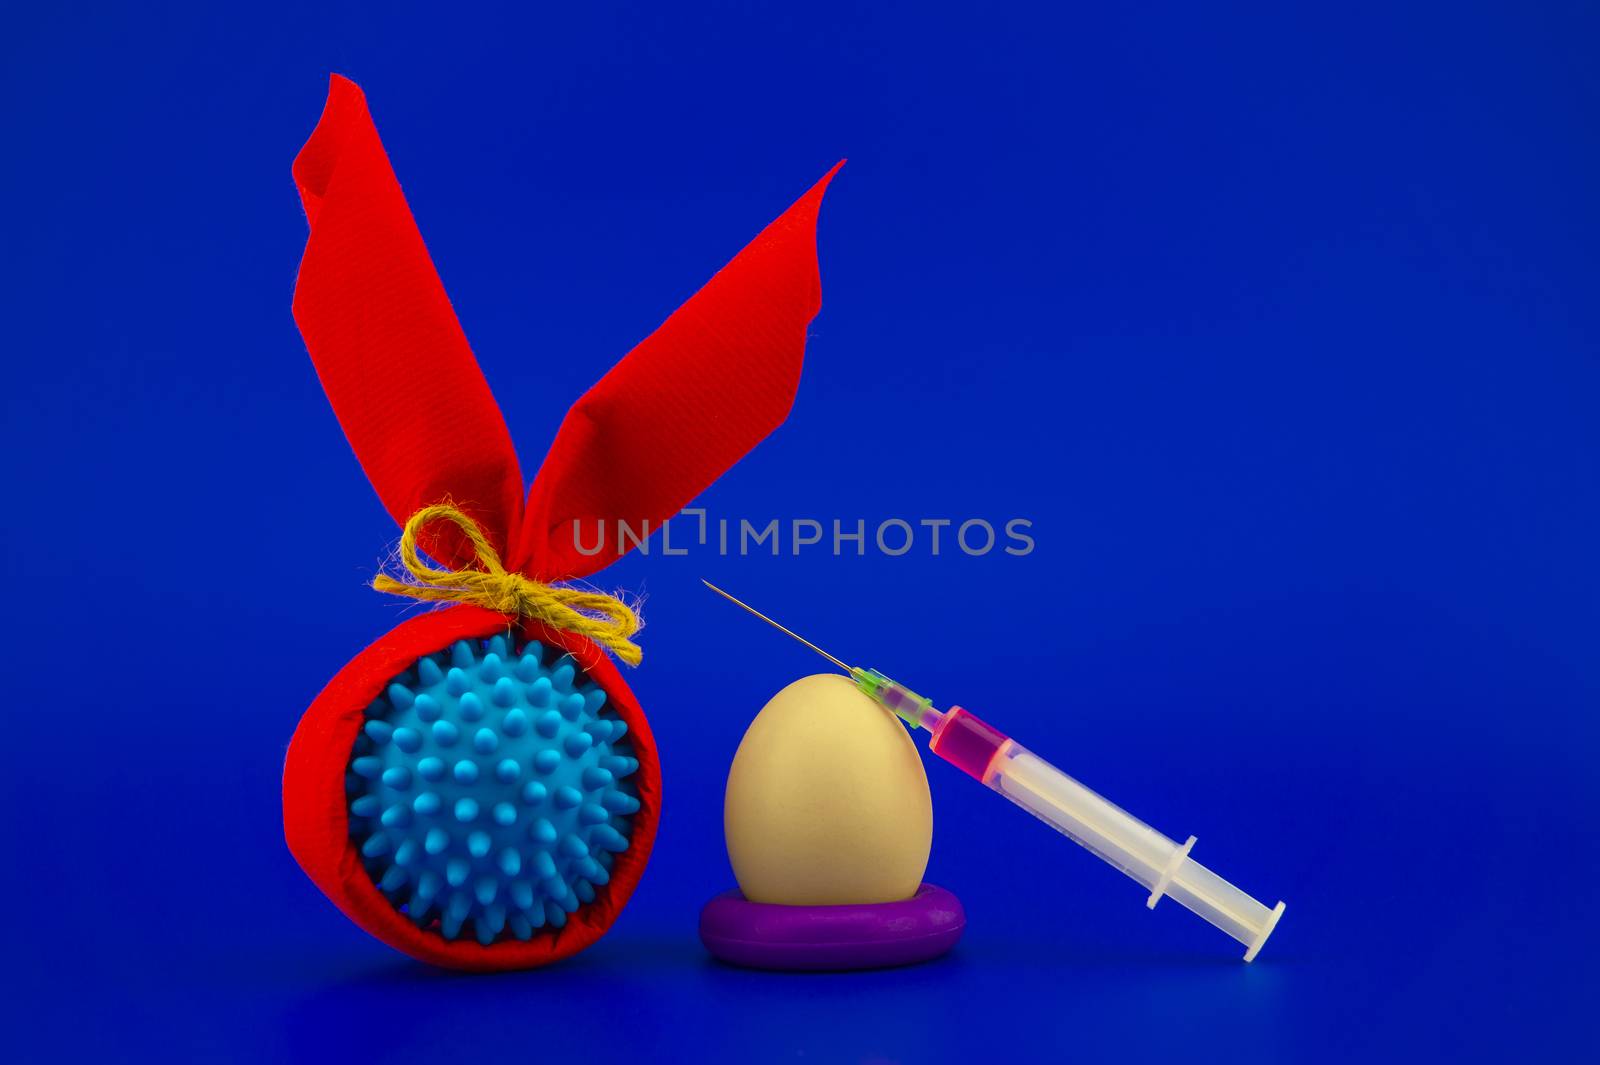 Virus models wrapped as gifts and Easter eggs by NetPix